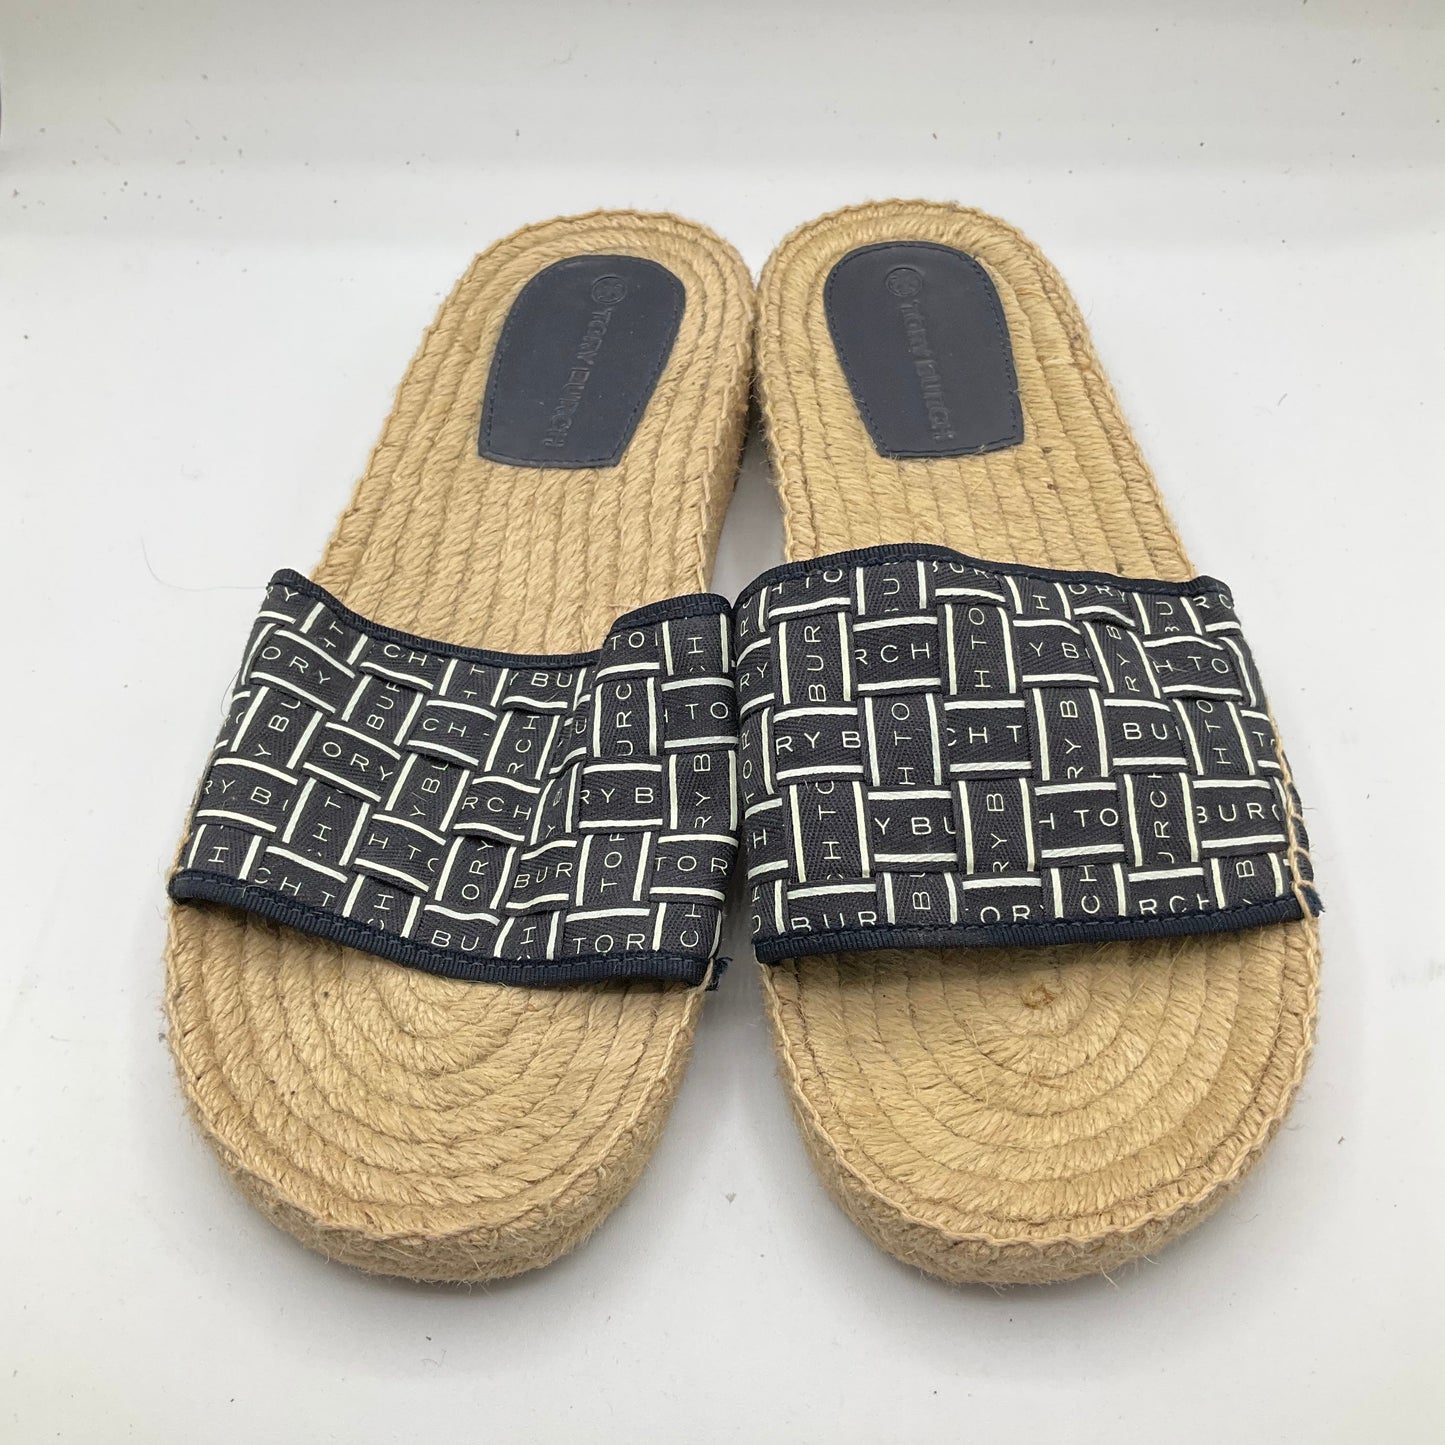 Sandals Designer By Tory Burch  Size: 8.5